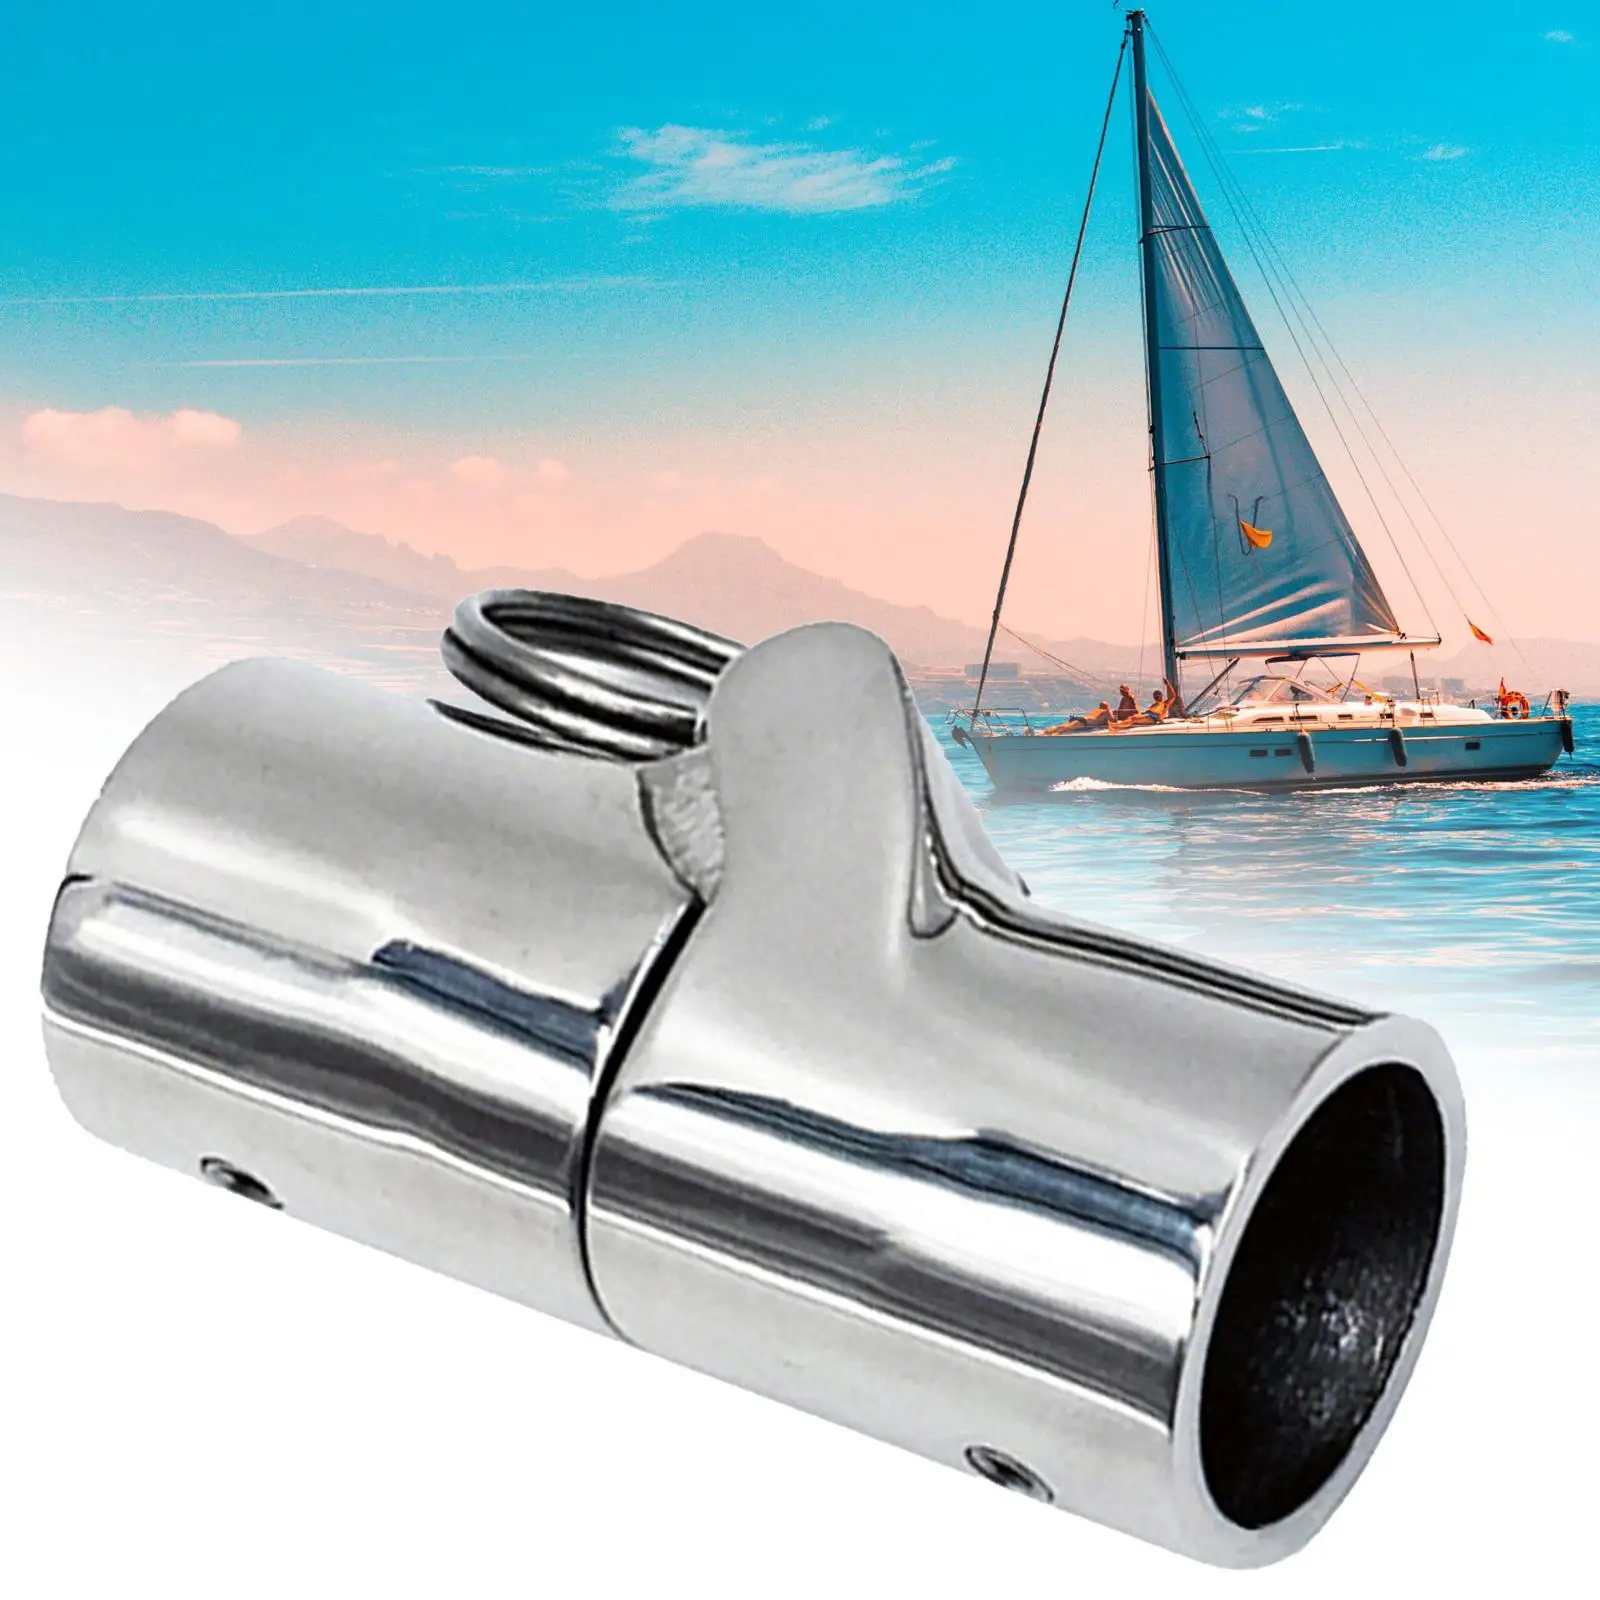 Coupling Tube Marine Folding Swivel Pipe Boat Equipment Tools Connector Marines Yacht Fitting Supplies